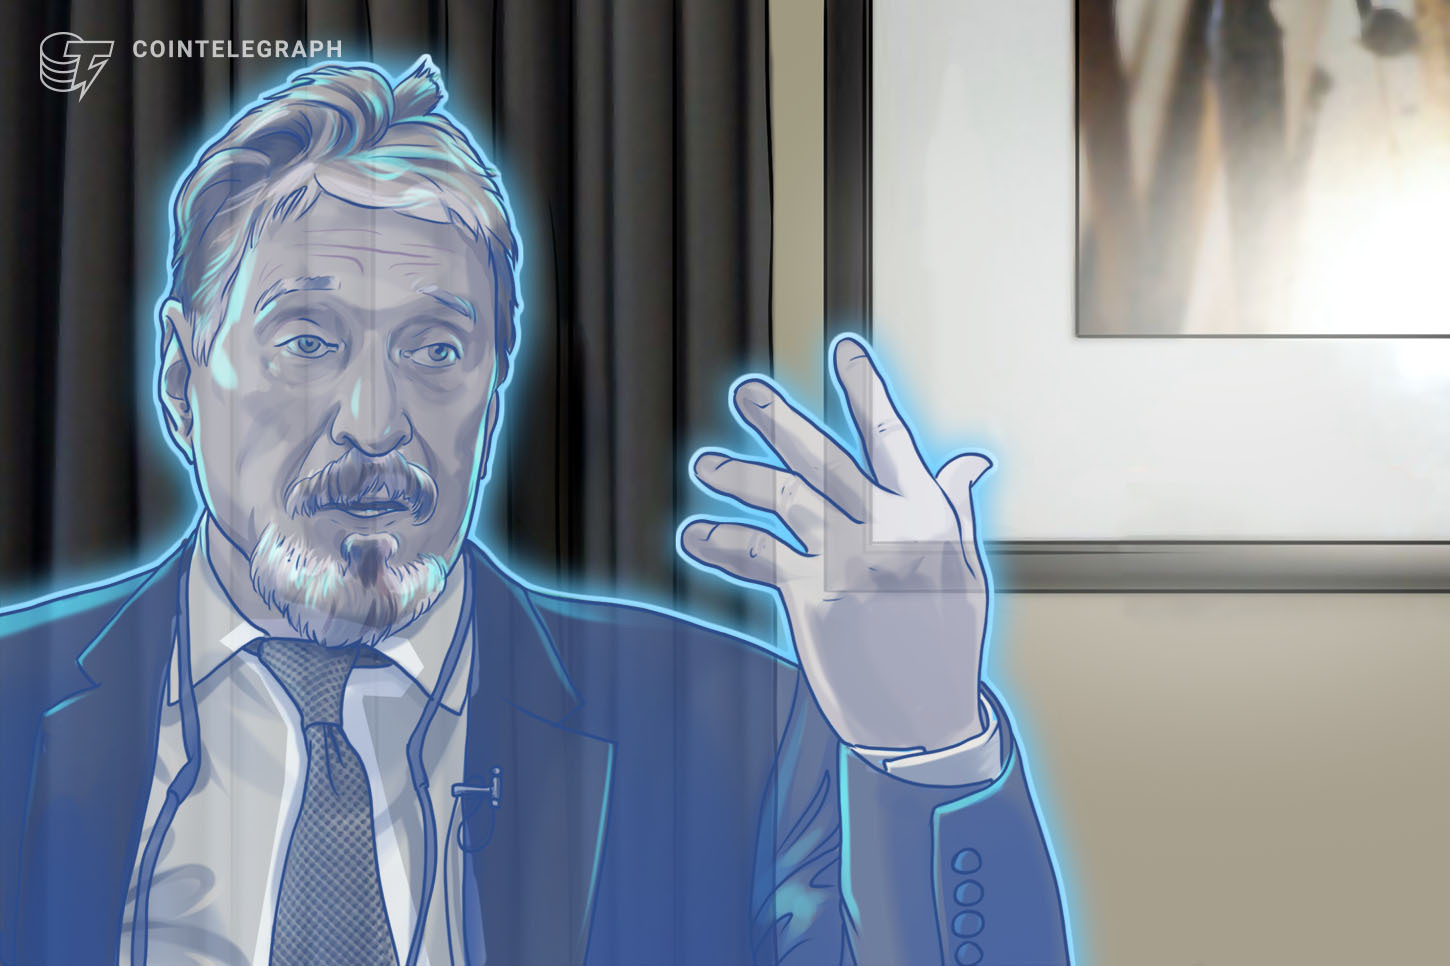 SEC carry John McAfee to court docket over ICO promotion